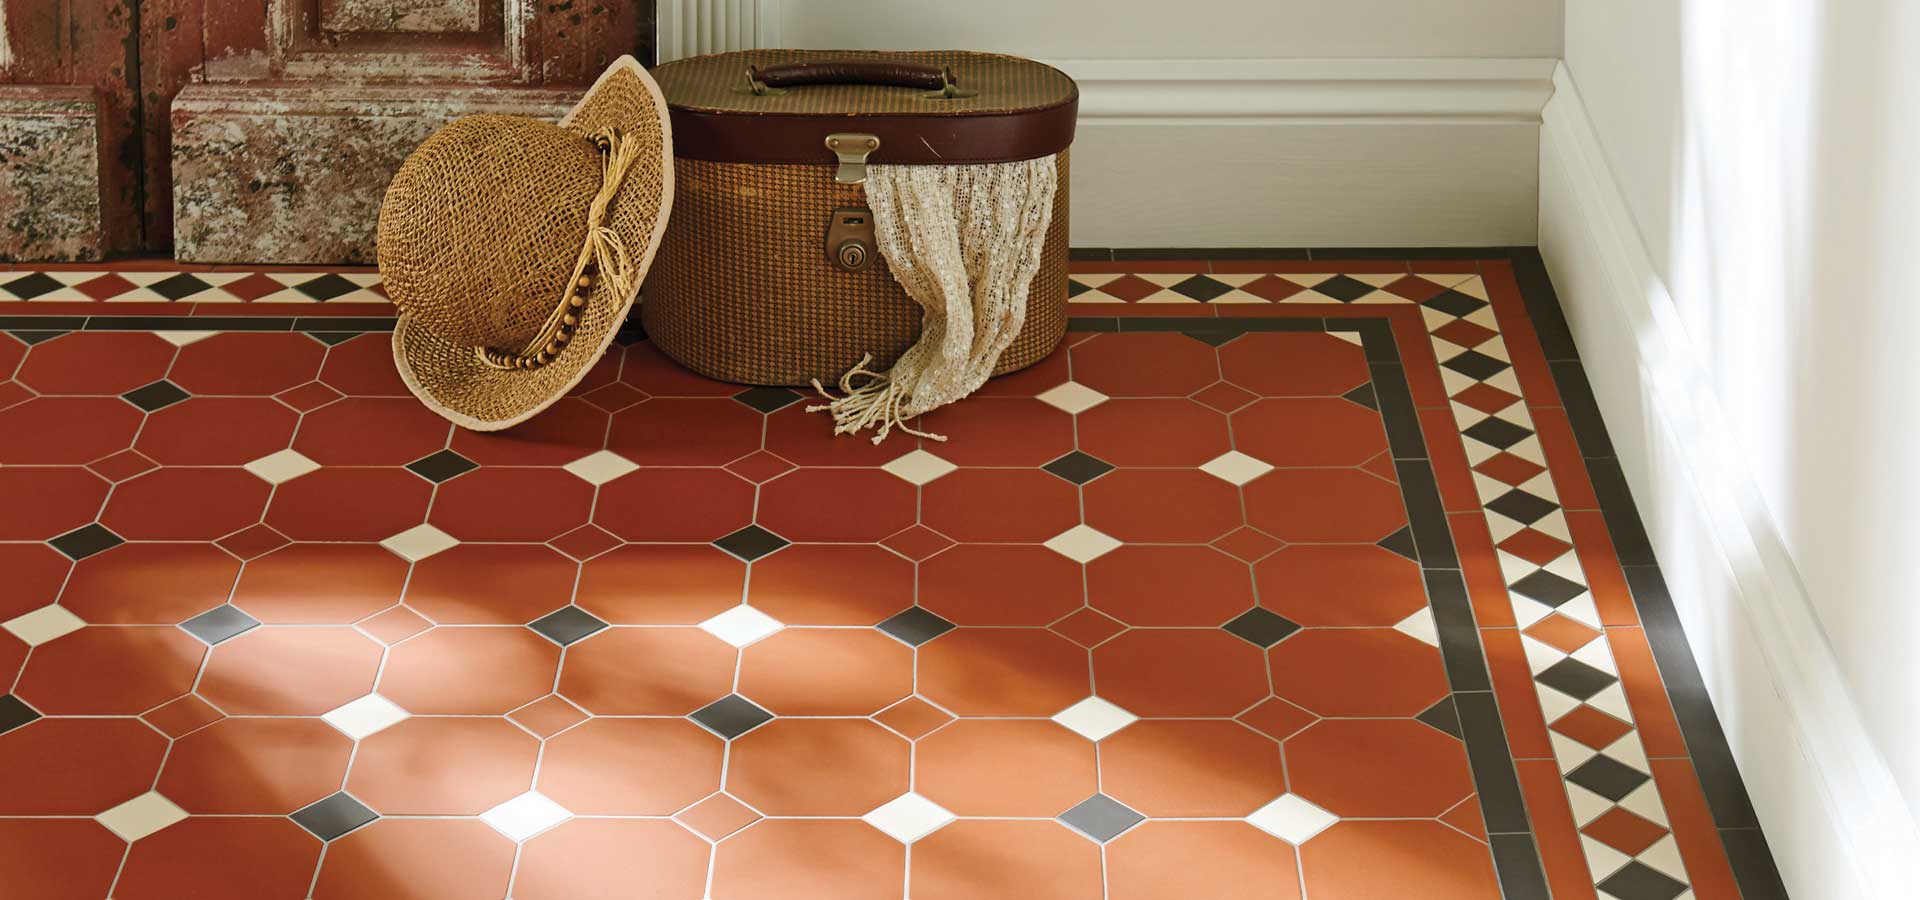 Original Style Victorian Floor Tiles - Harrogate pattern and modified Kingsley border in Red, Black and White Slider